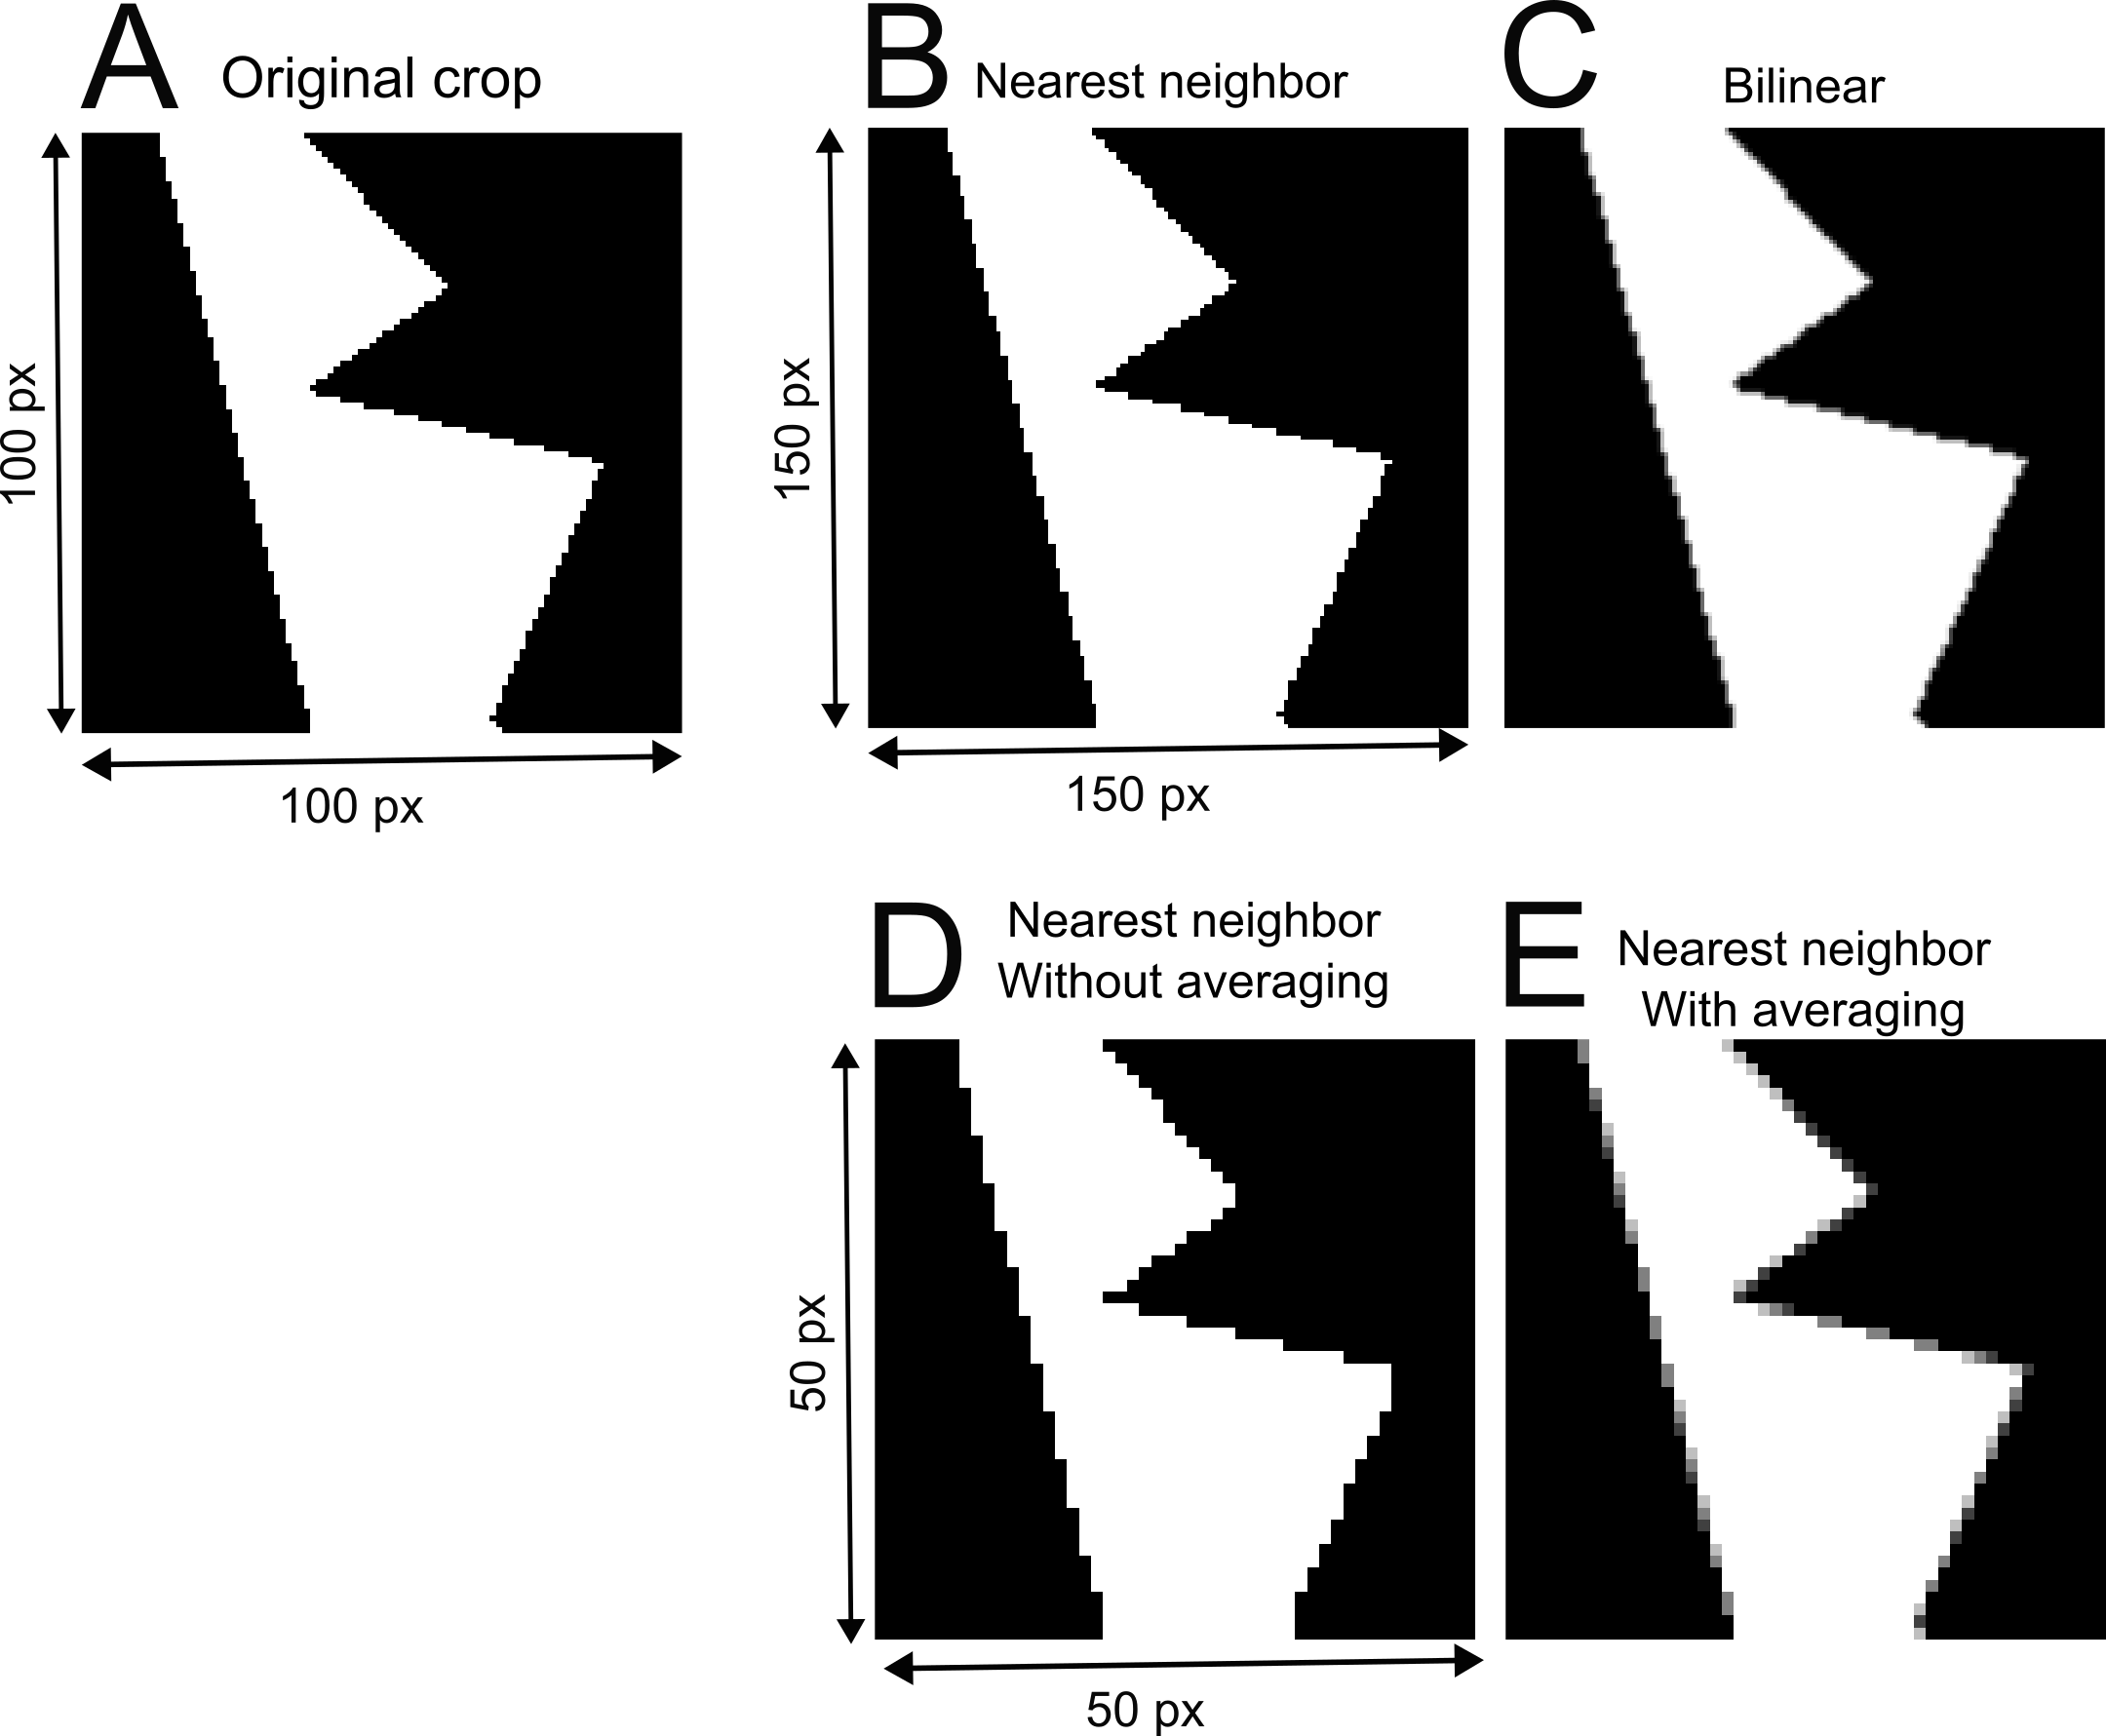 Image resized with different interpolations